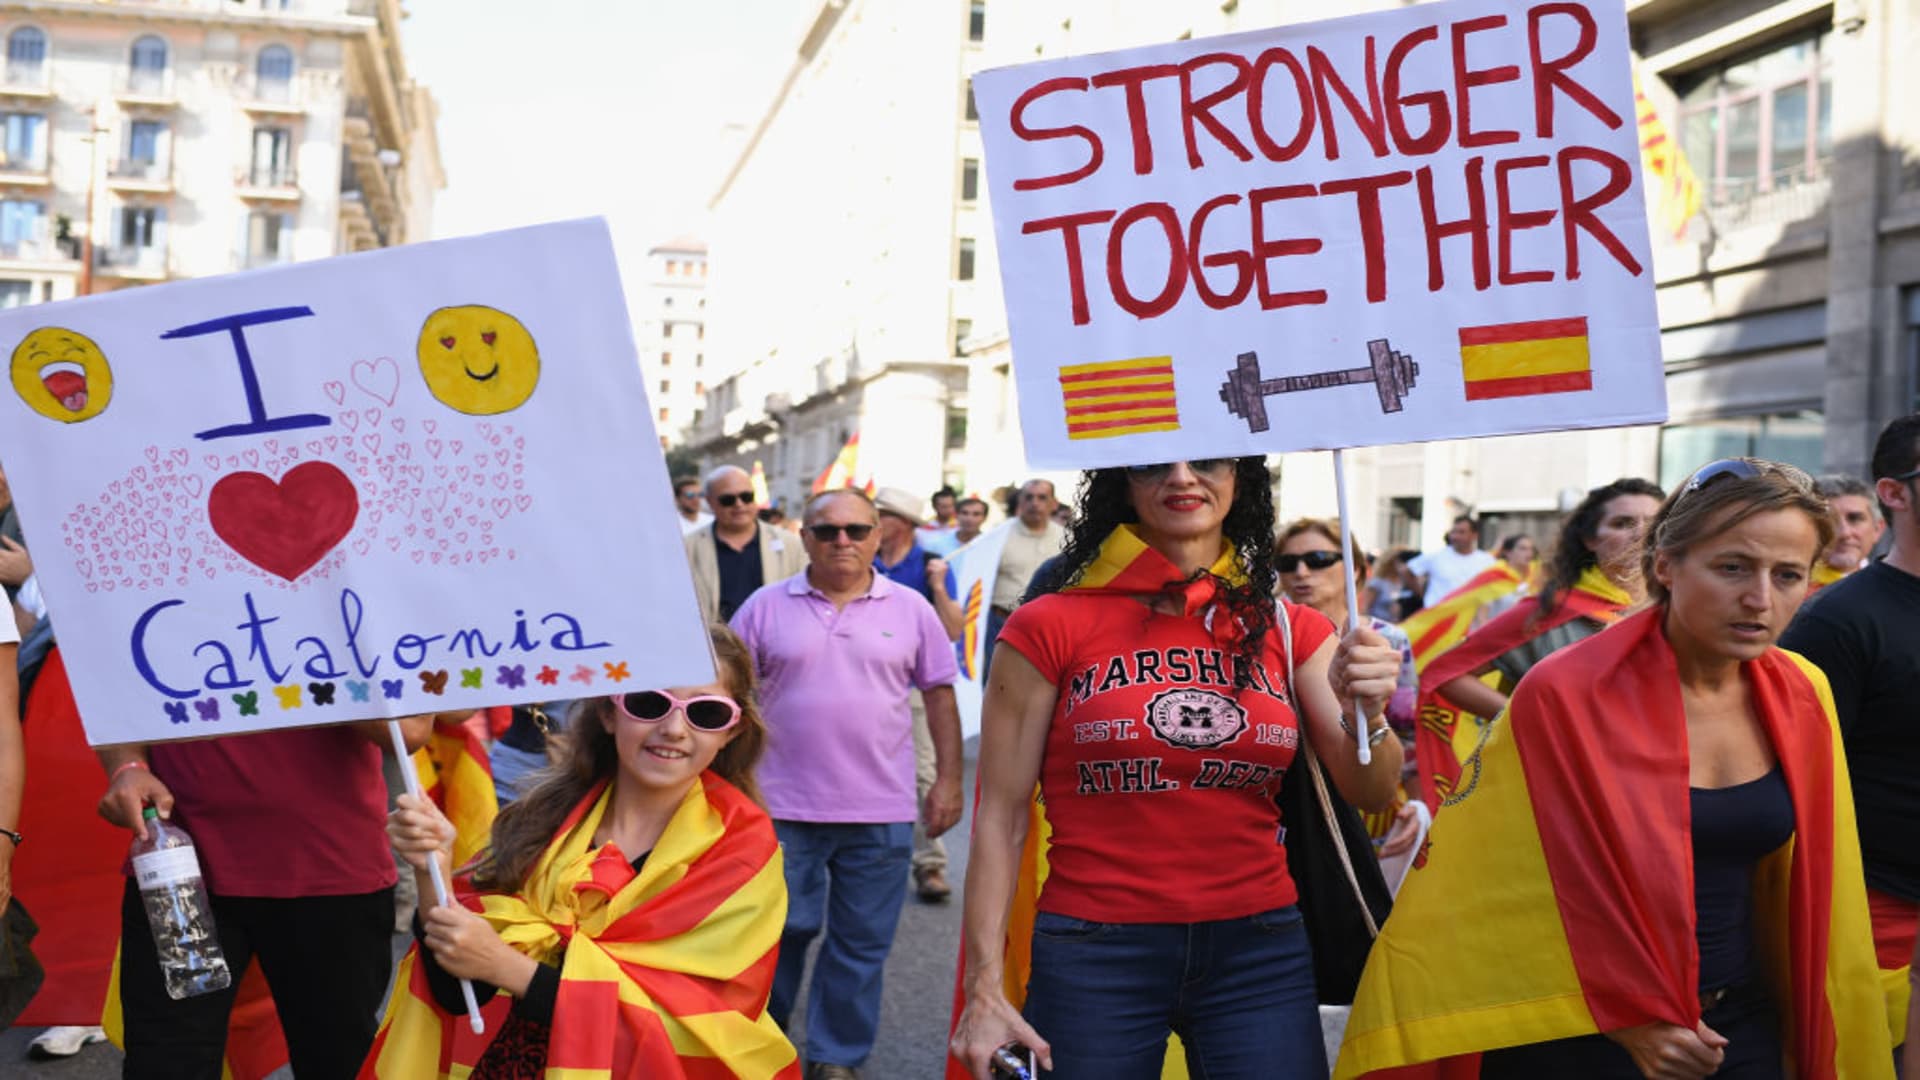 Catalan separatists reduce majority as Spain’s professional-union Socialists gain regional elections